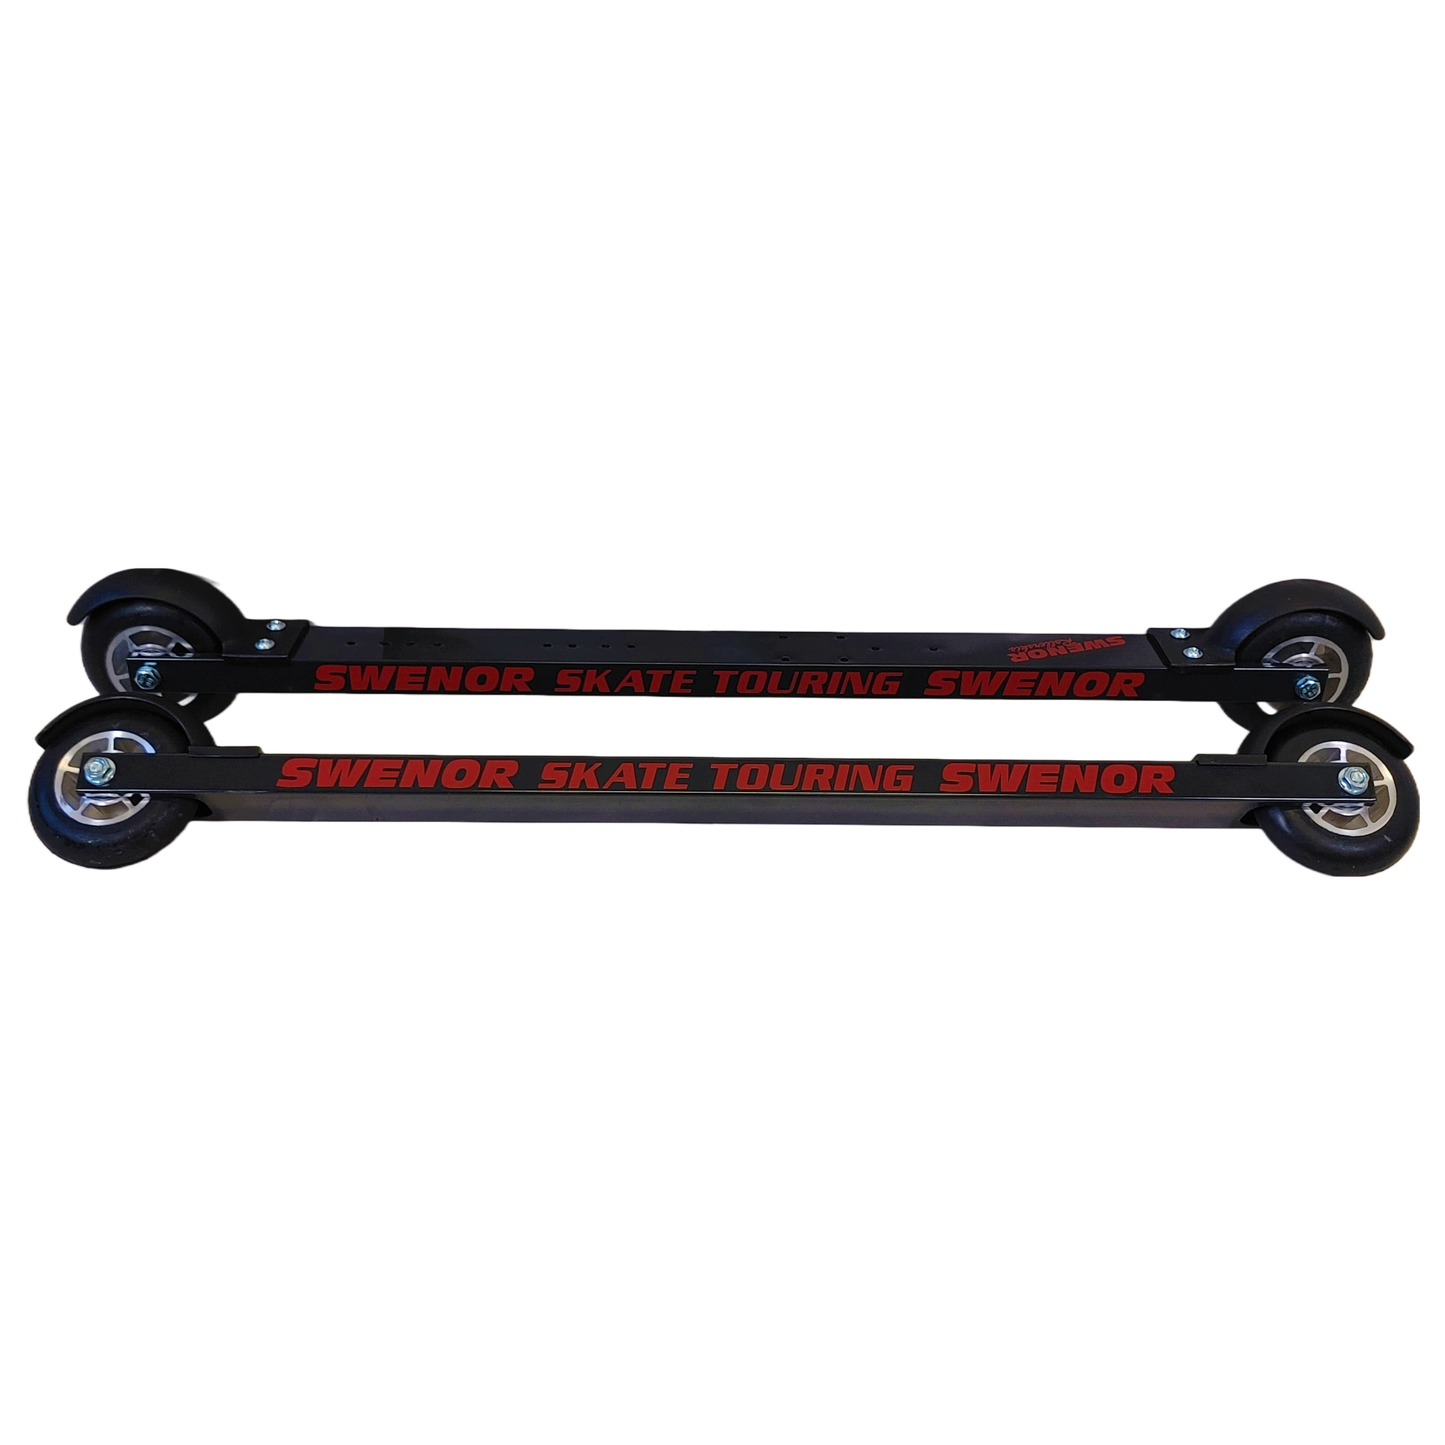 A product picture of the Swenor Skate Touring Aluminium Rollerskis